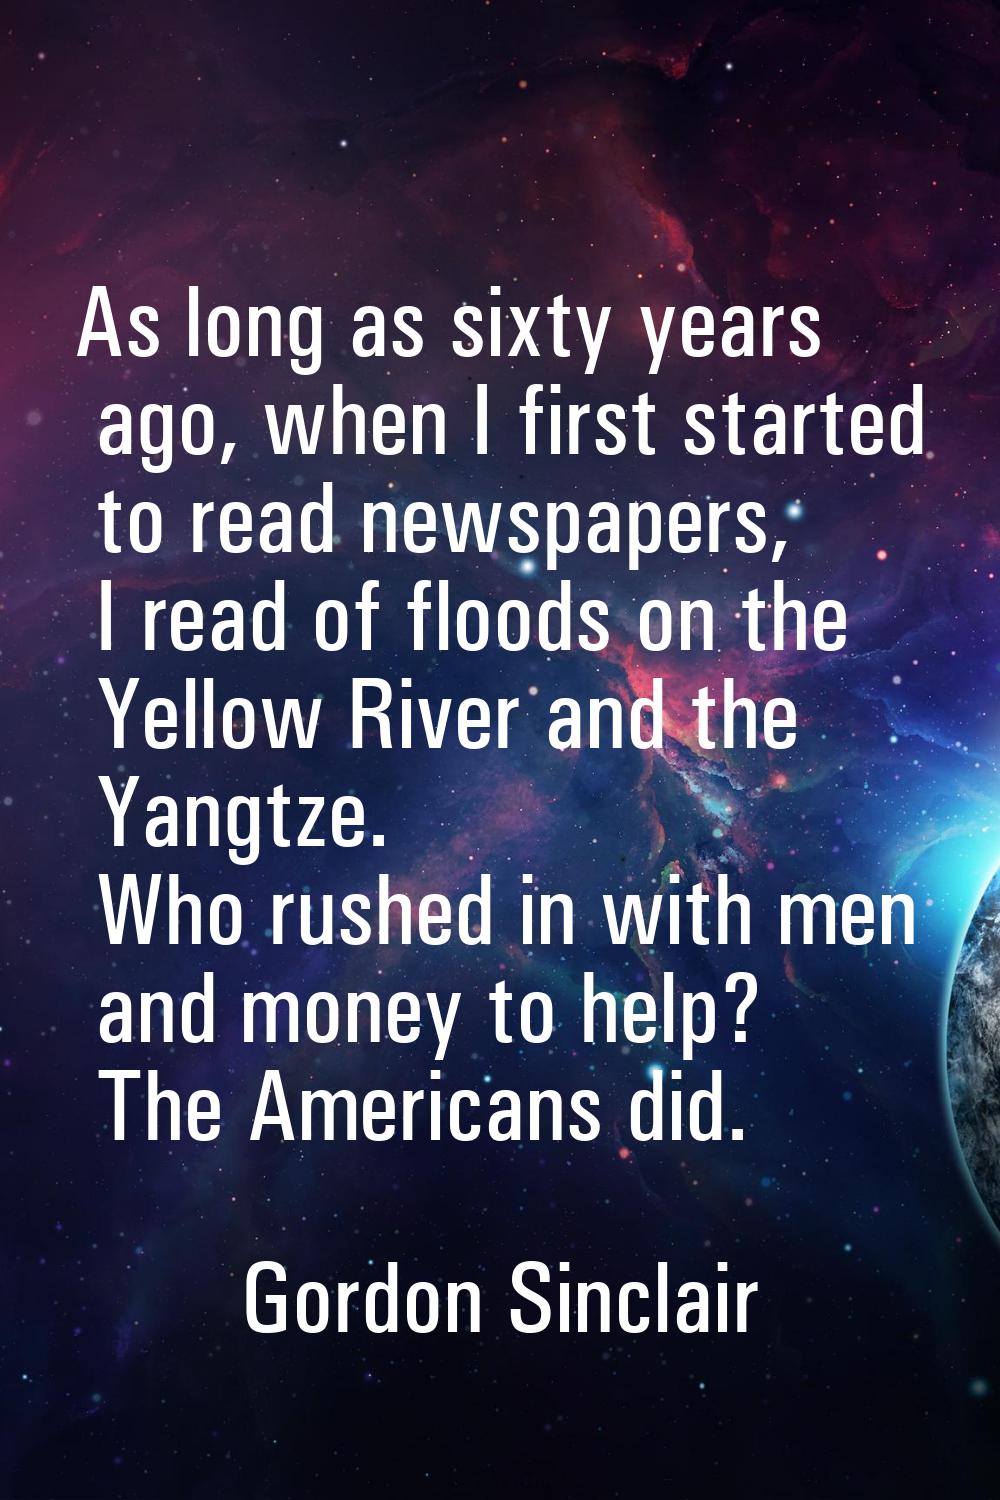 As long as sixty years ago, when I first started to read newspapers, I read of floods on the Yellow